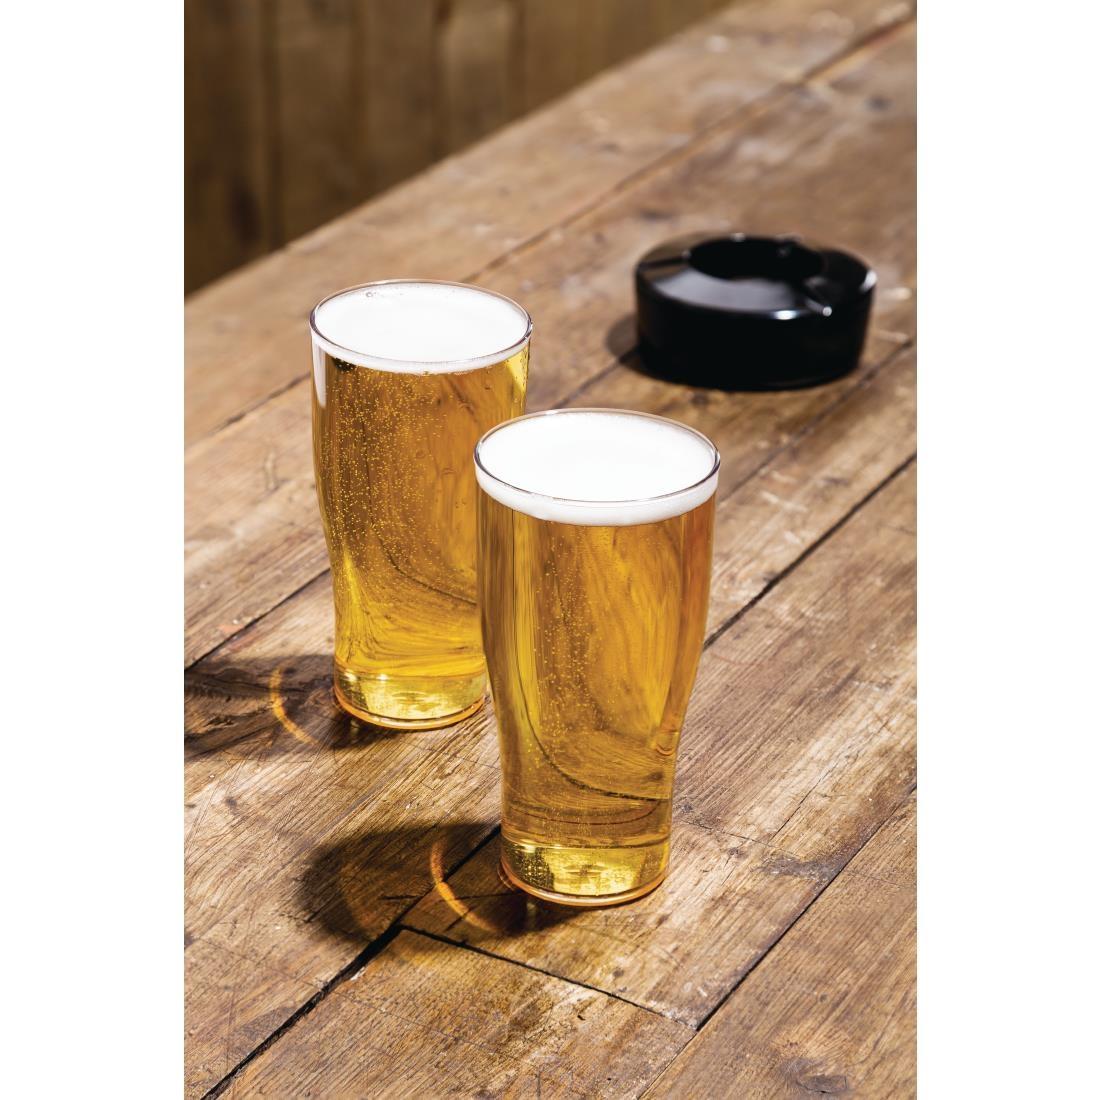 BBP Polycarbonate Nucleated Pint Glasses CE Marked (Pack of 48) - U403  - 3